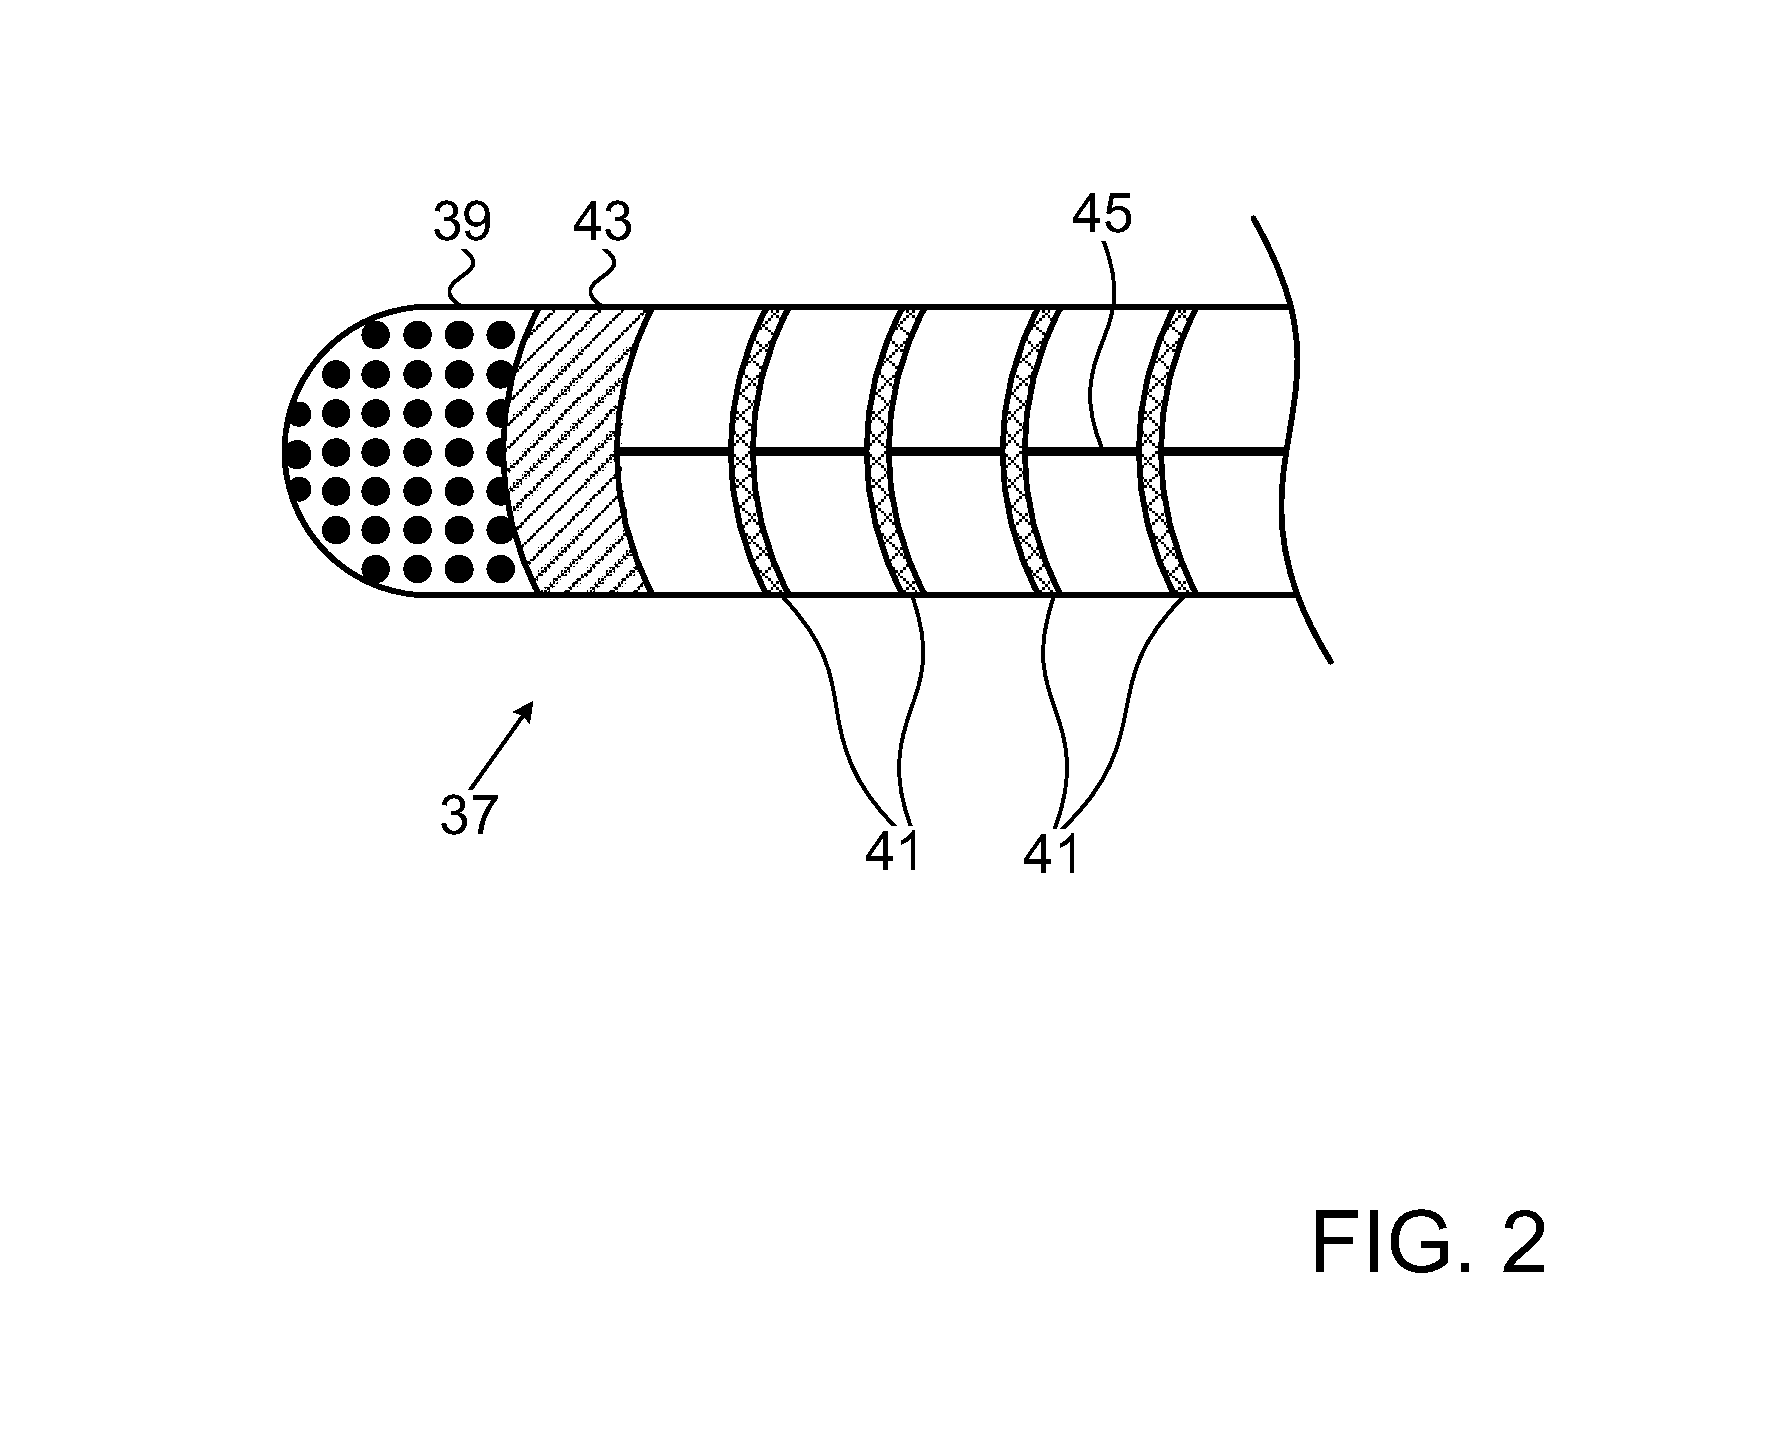 Graphic interface for multi-spine probe